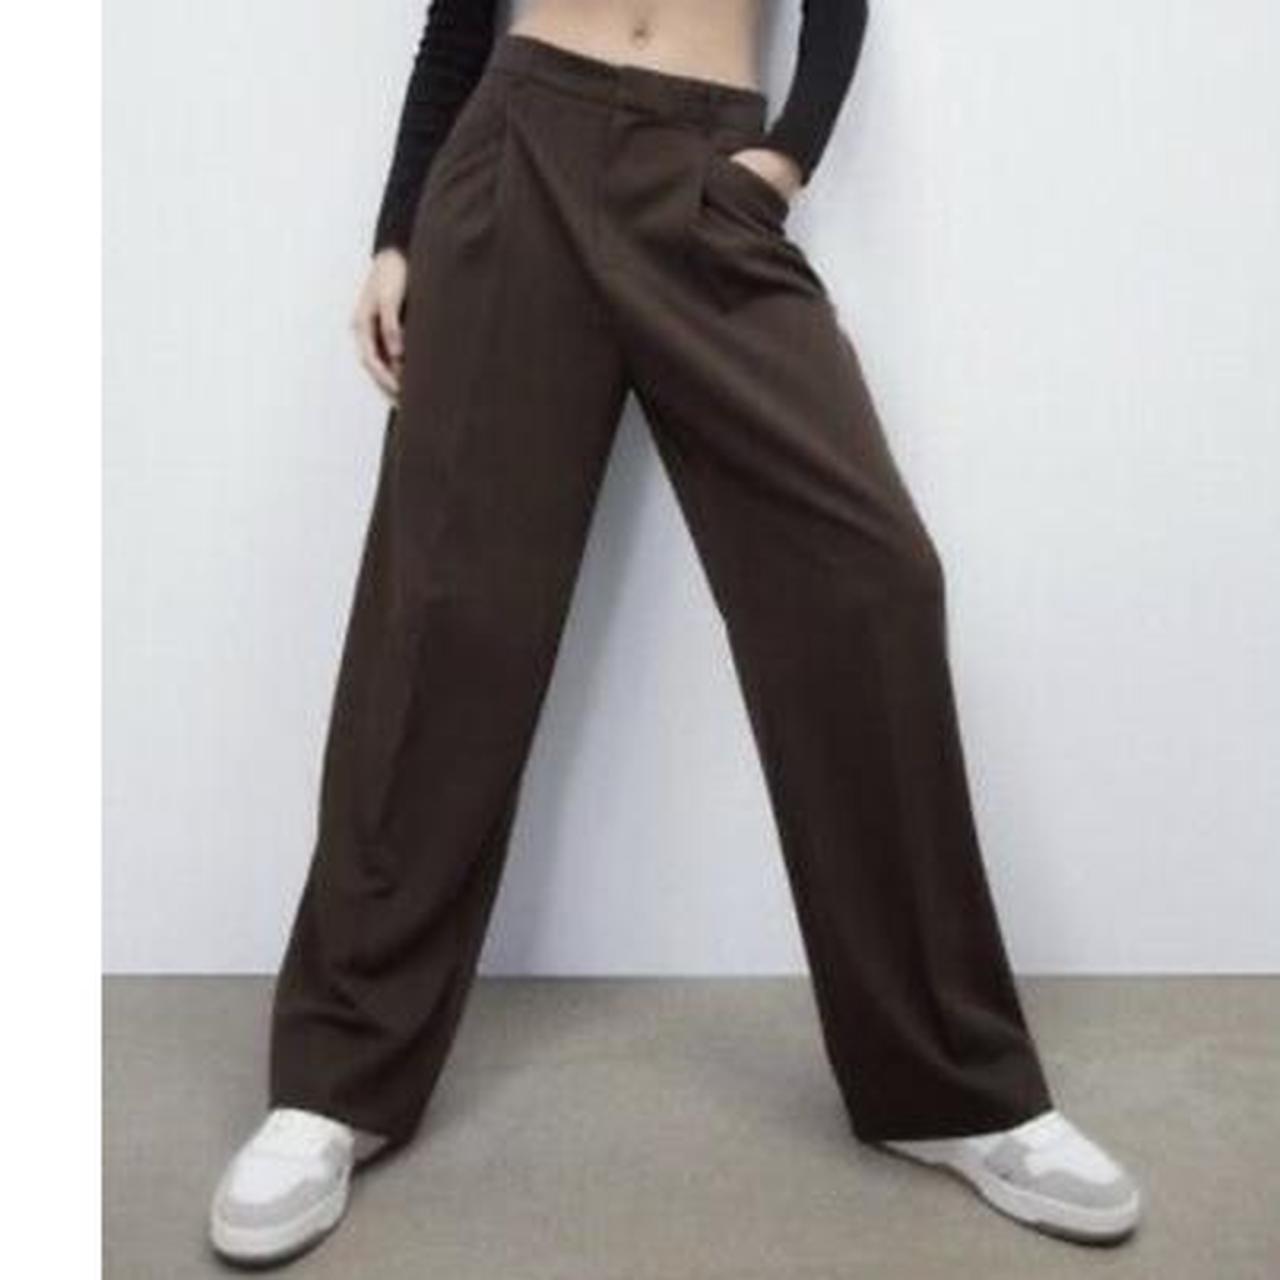 Zara brown wide leg full length trousers, New with